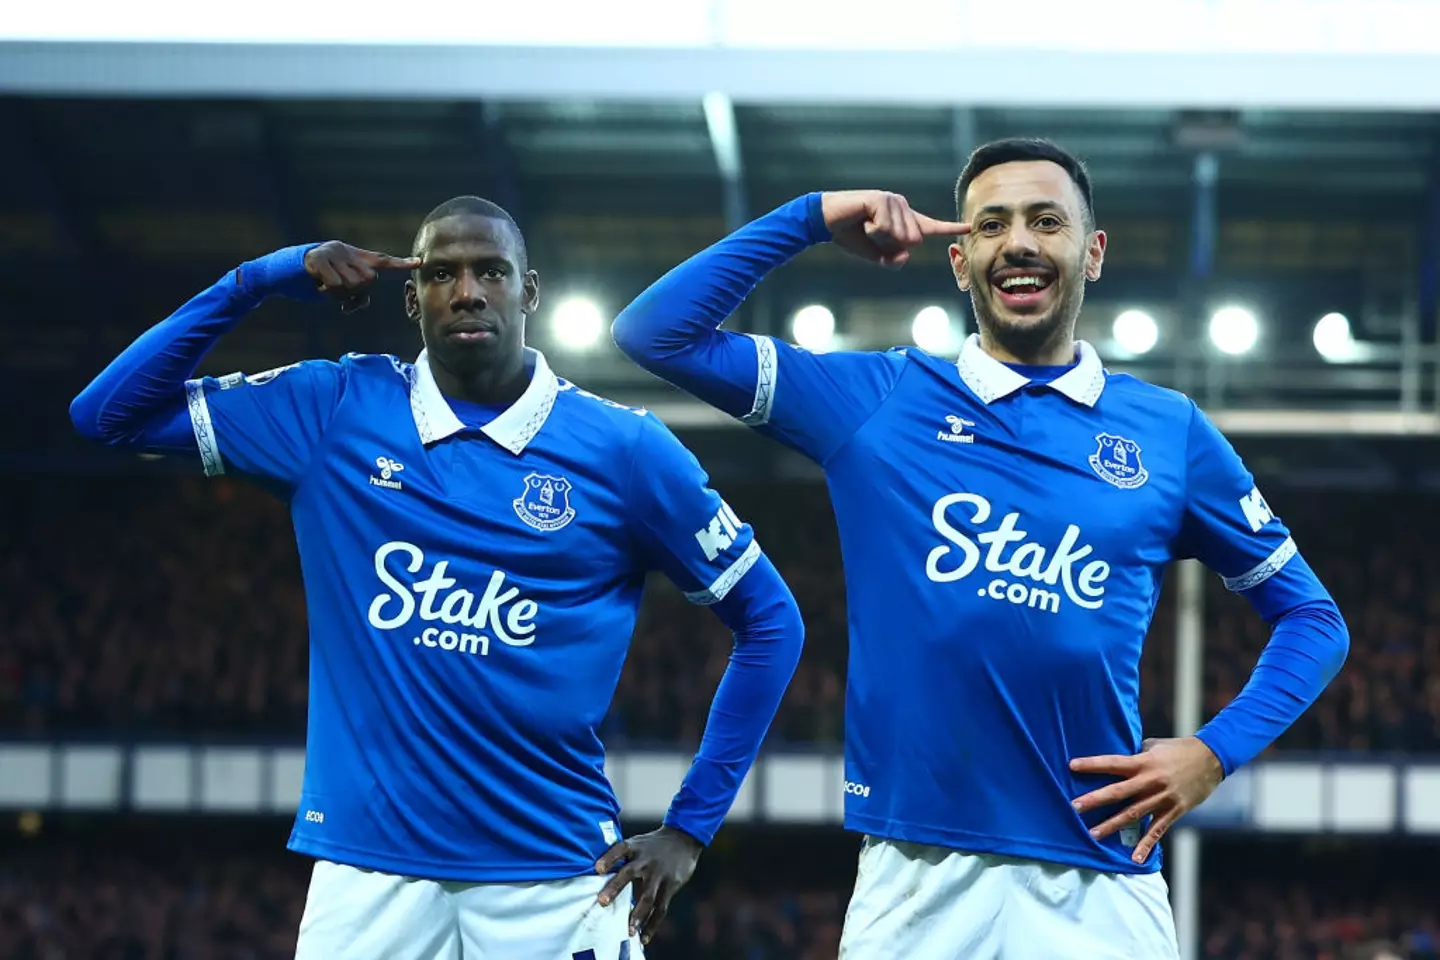 Everton have already been docked 10 points by the Premier League (Image: Getty)